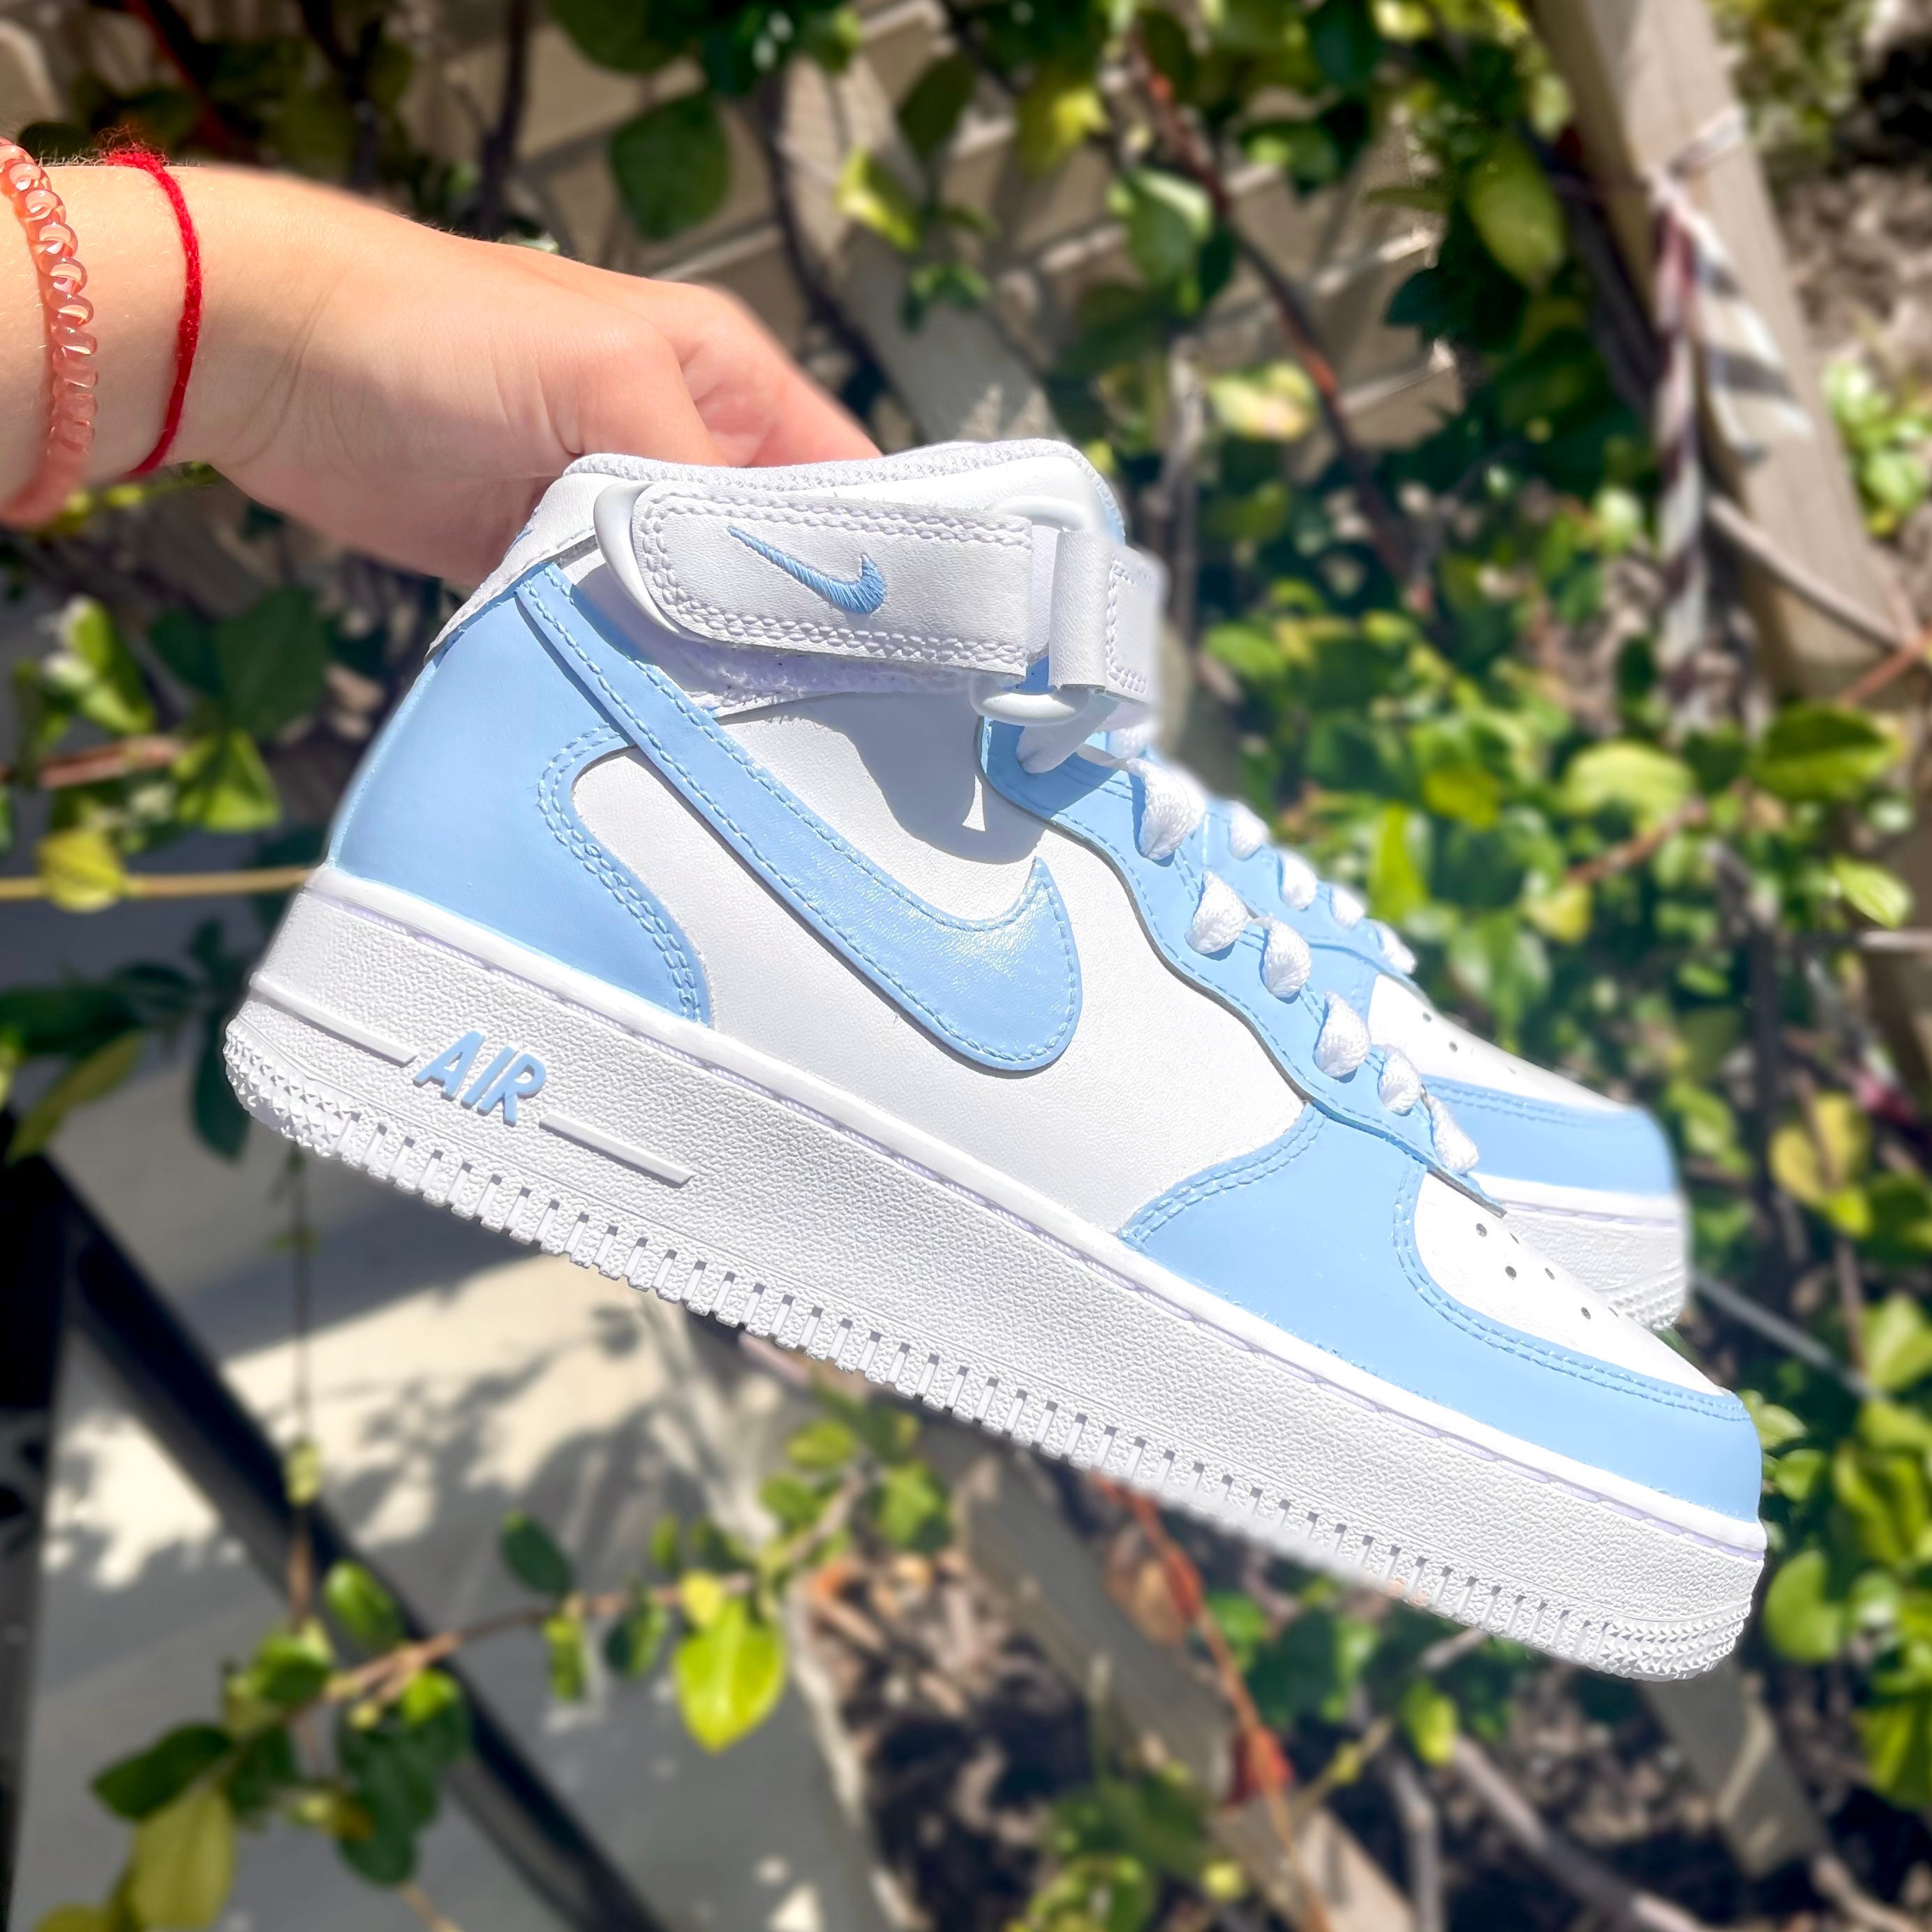 Baby Blue Custom Air Force 1 Sneakers Low/mid/high - Etsy